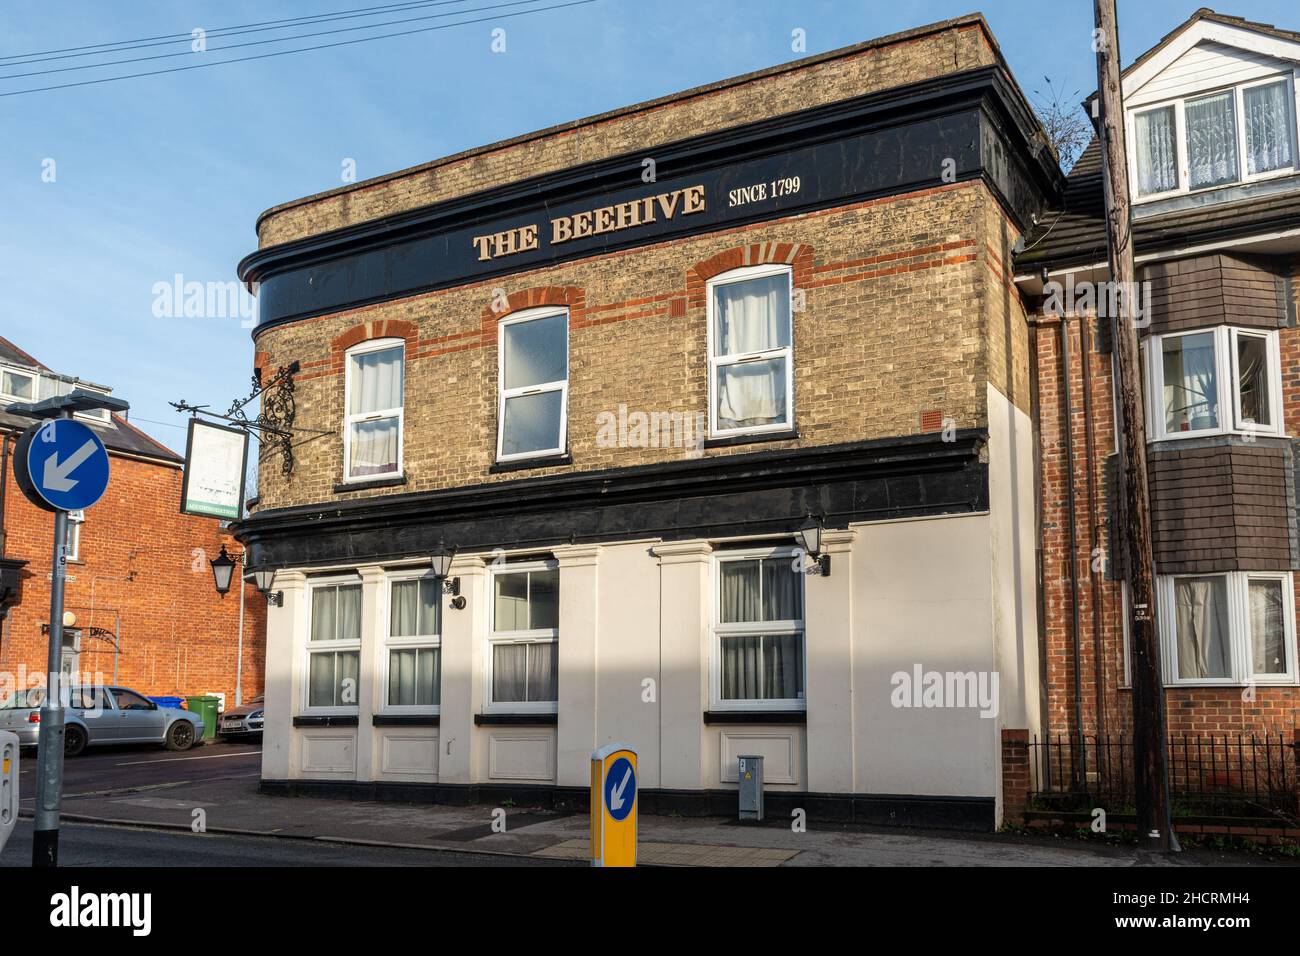 The Beehive Pub in Aldershot, Hampshire, England, UK. Old architectural style pub, permanently closed in 2014. Stock Photo